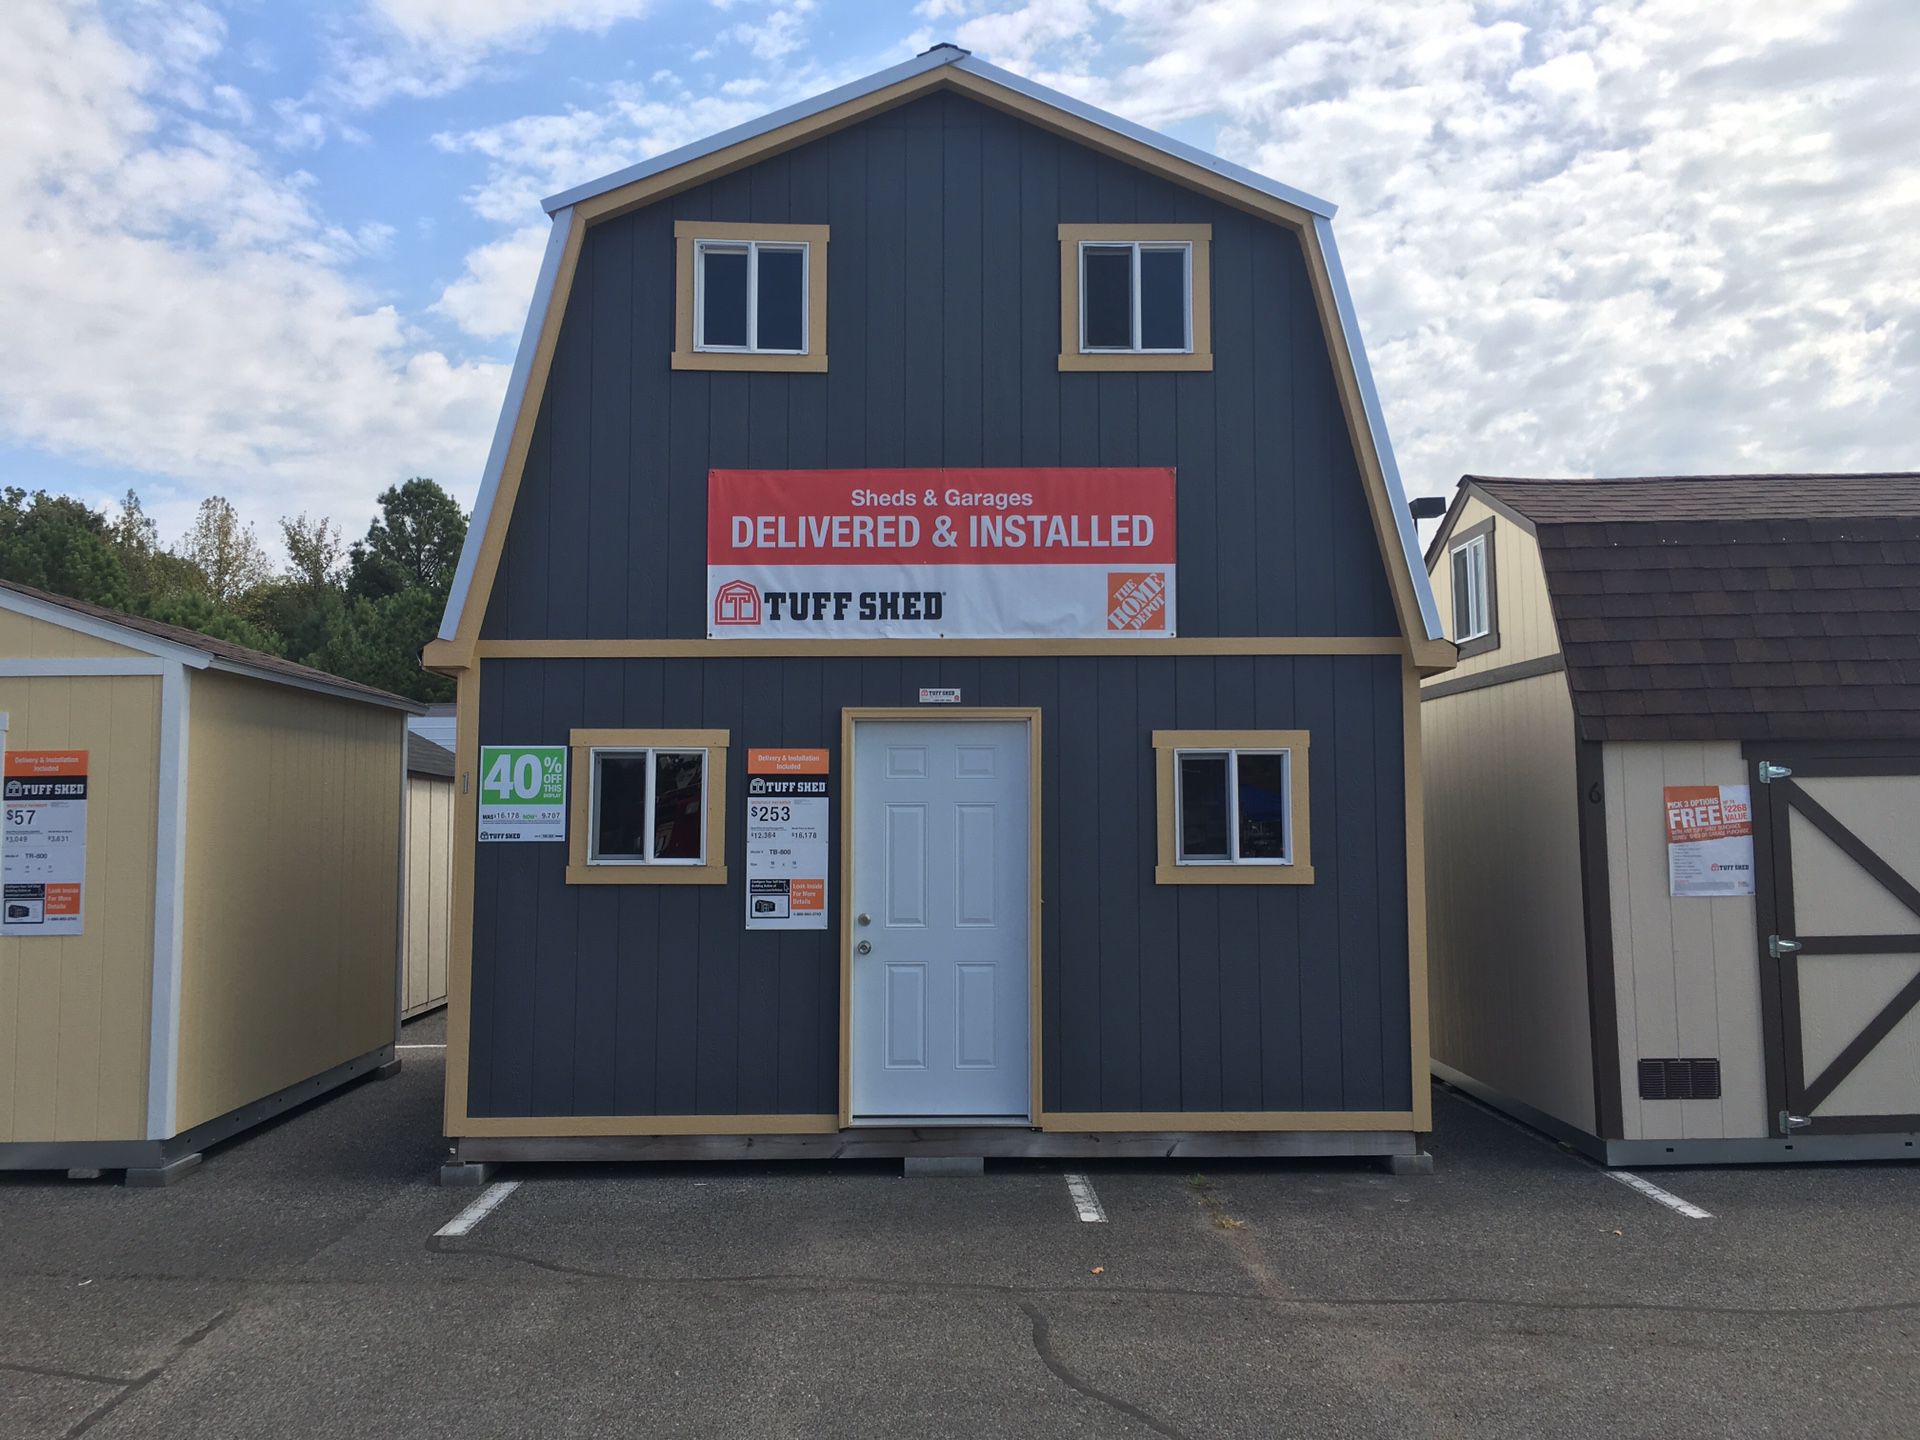 Tuff Shed model TB 800. 16 x 16. Was $16,178. Now $$9707. Save $6471! Includes delivery and installation.